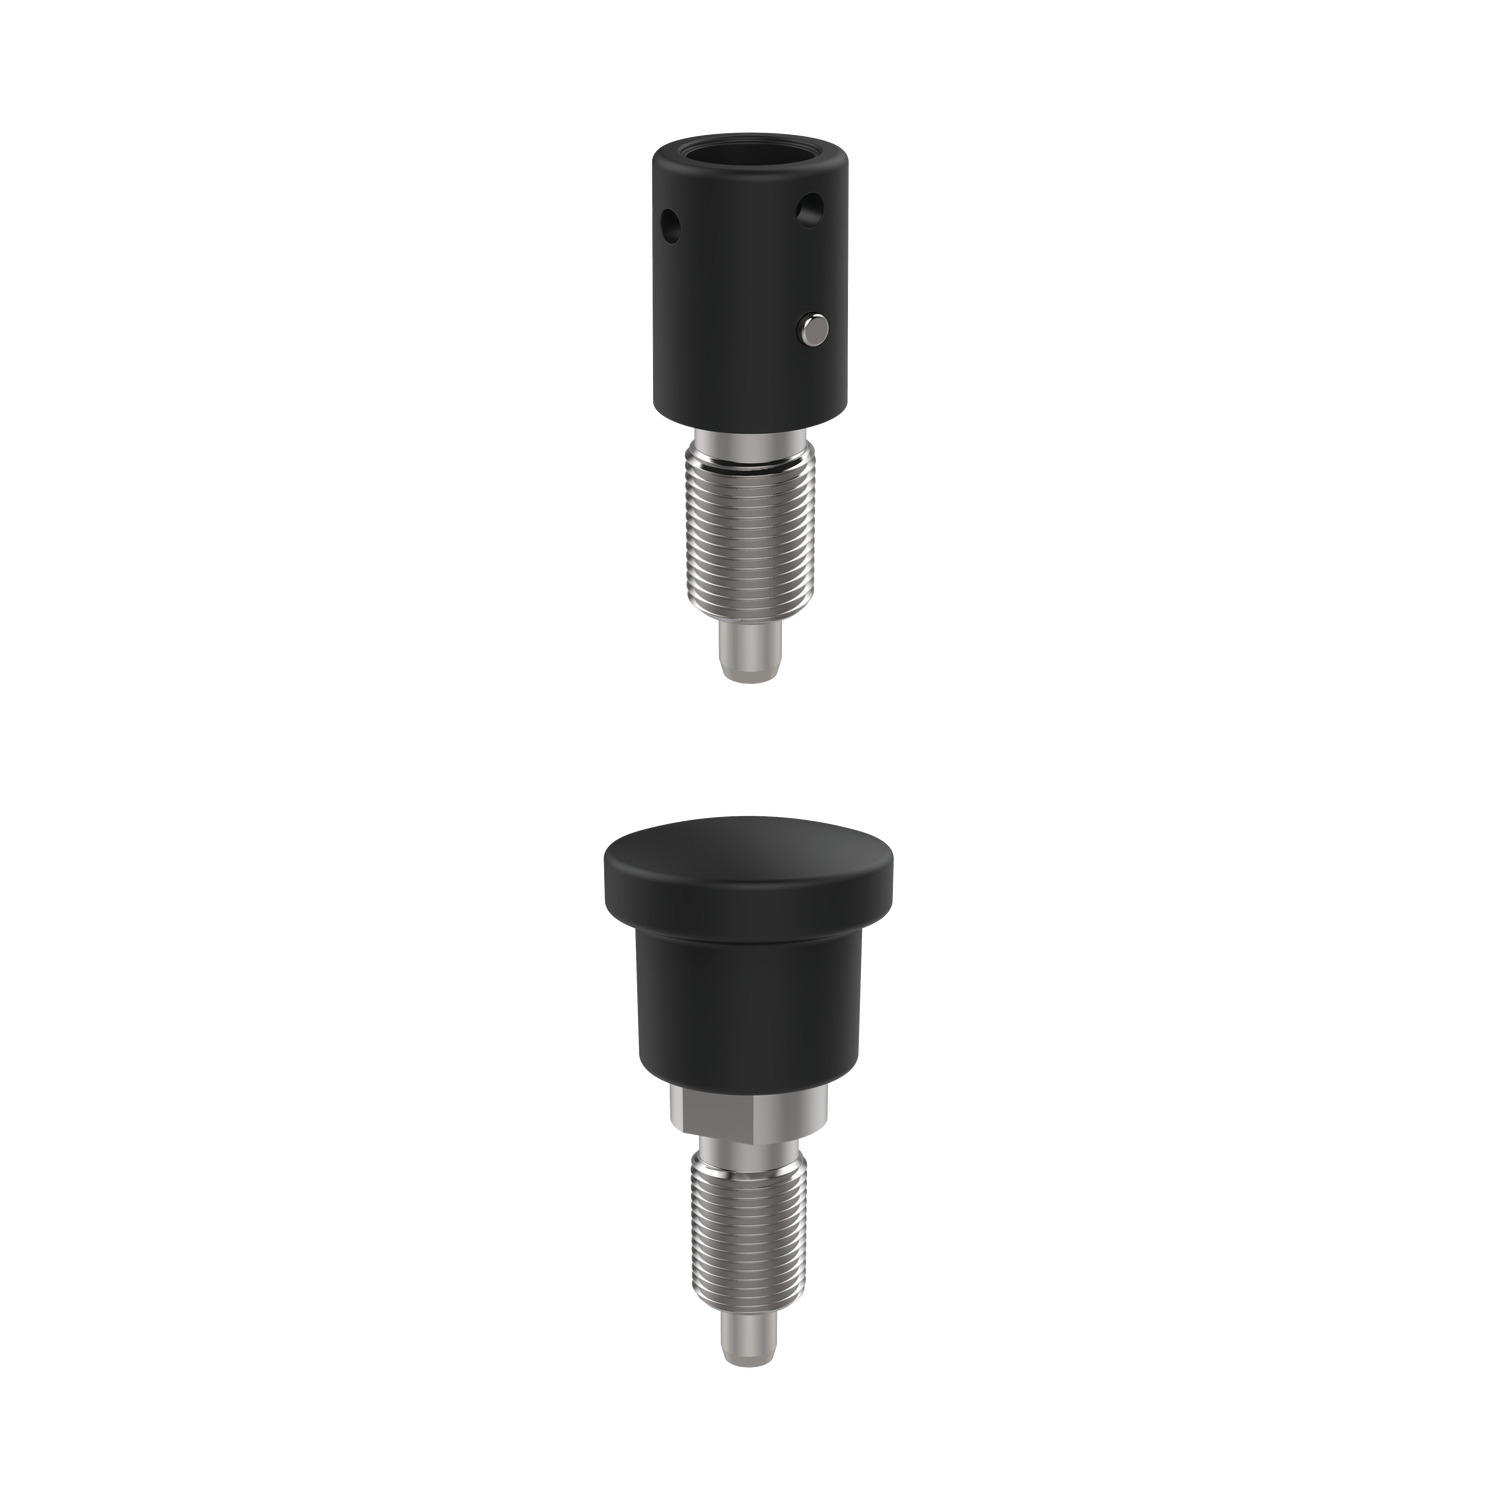 32781.W0008 Safety Index Plunger With Tamper Resistant Feature. M16 with grip.  standard - locking pin protruding at start position, Material: Steel.